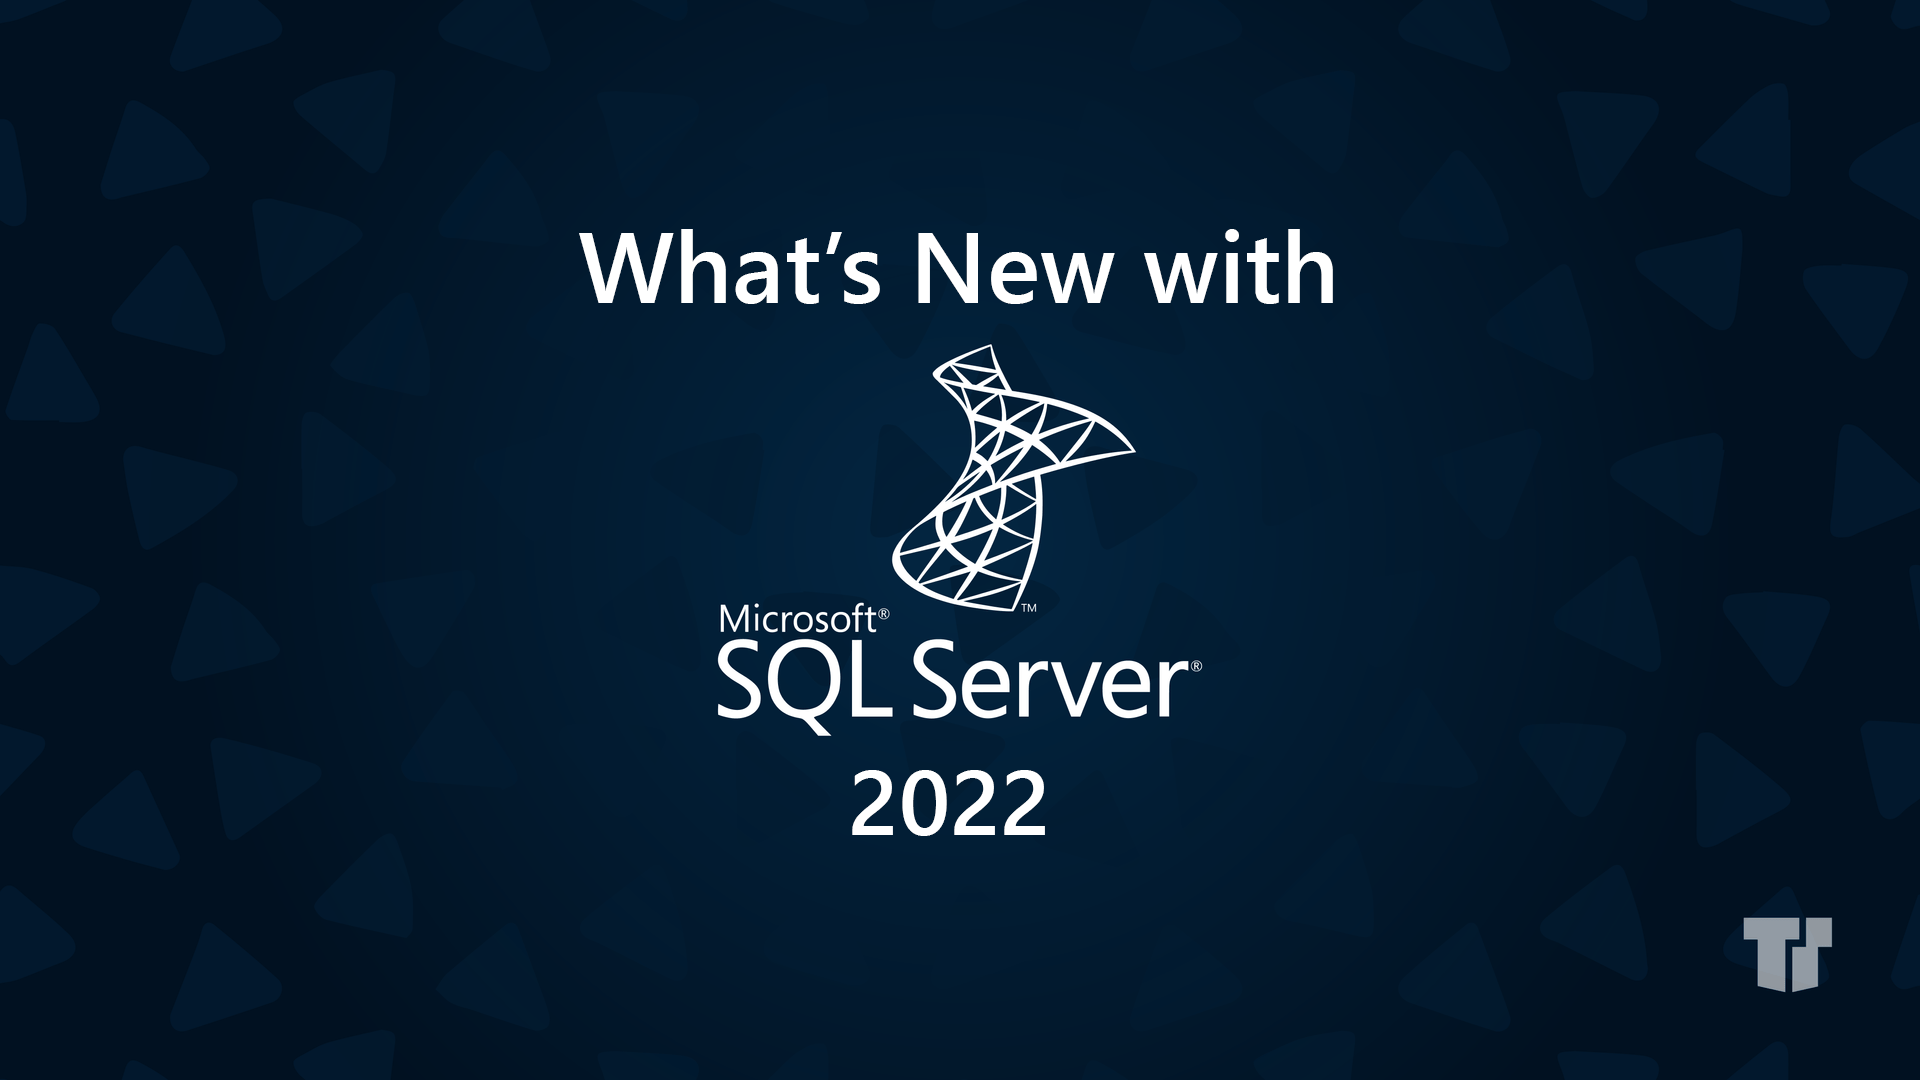 A Sneak Peek at SQL Server 2022: What We Know So Far cover image